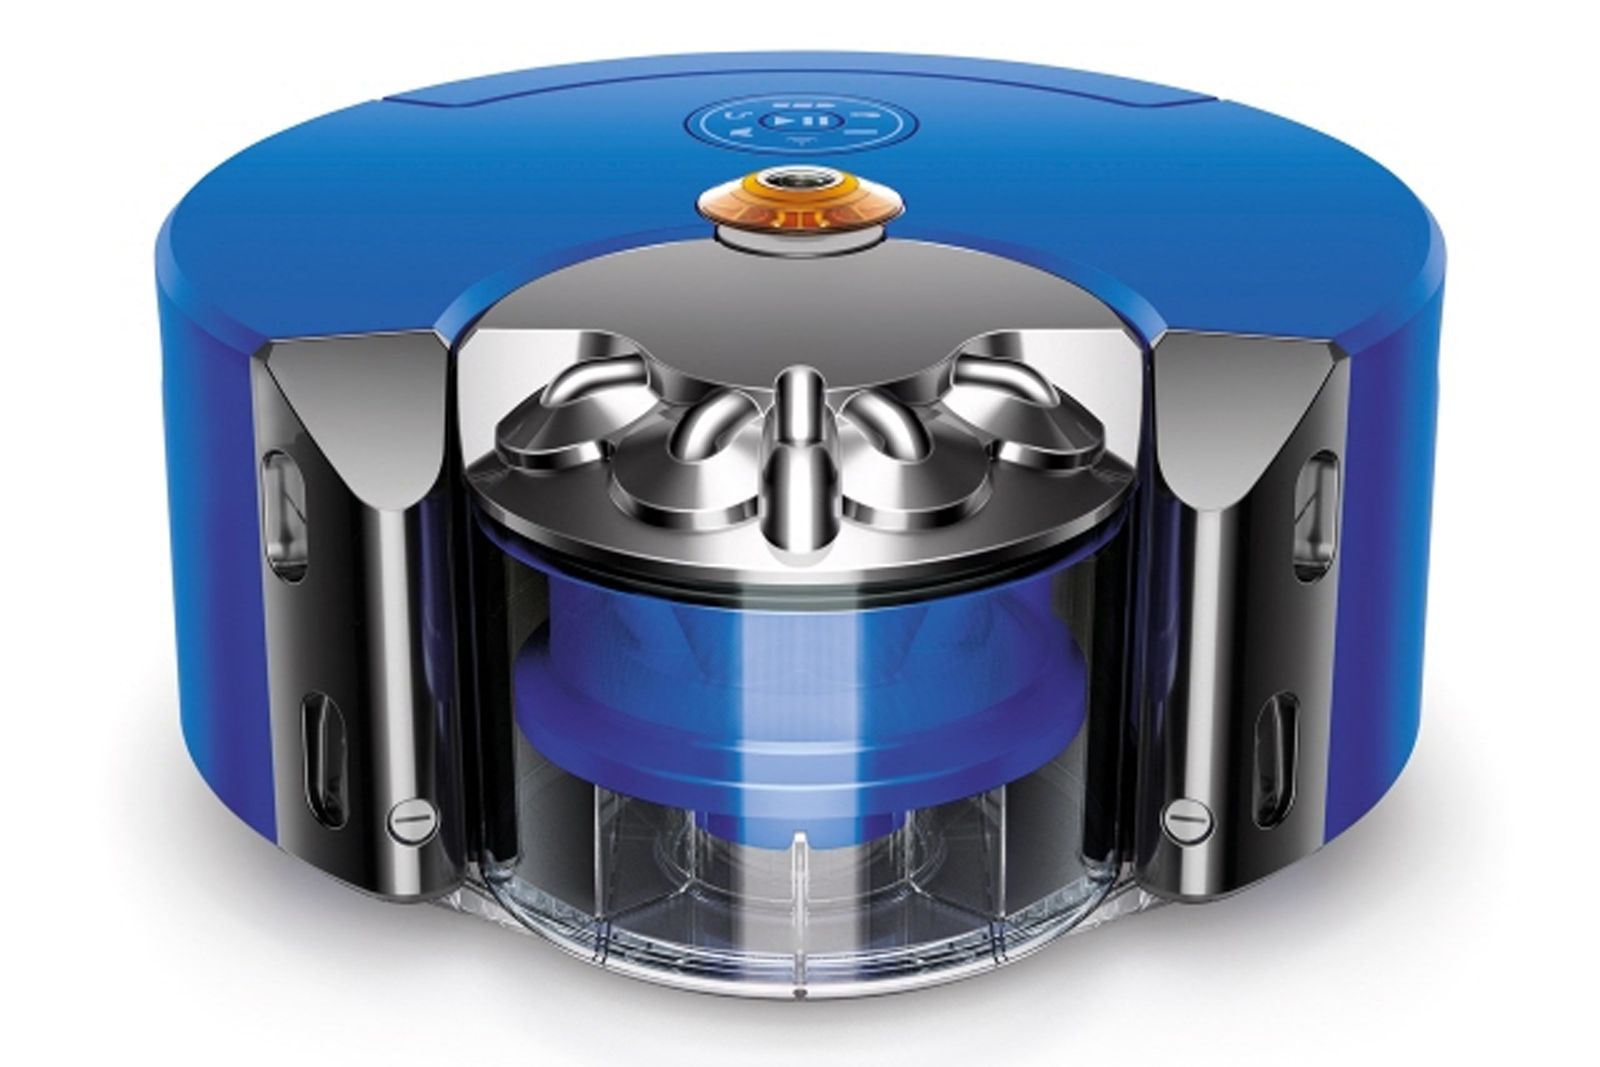 Dyson 360 Heurist robot vacuum: Everything you need to know